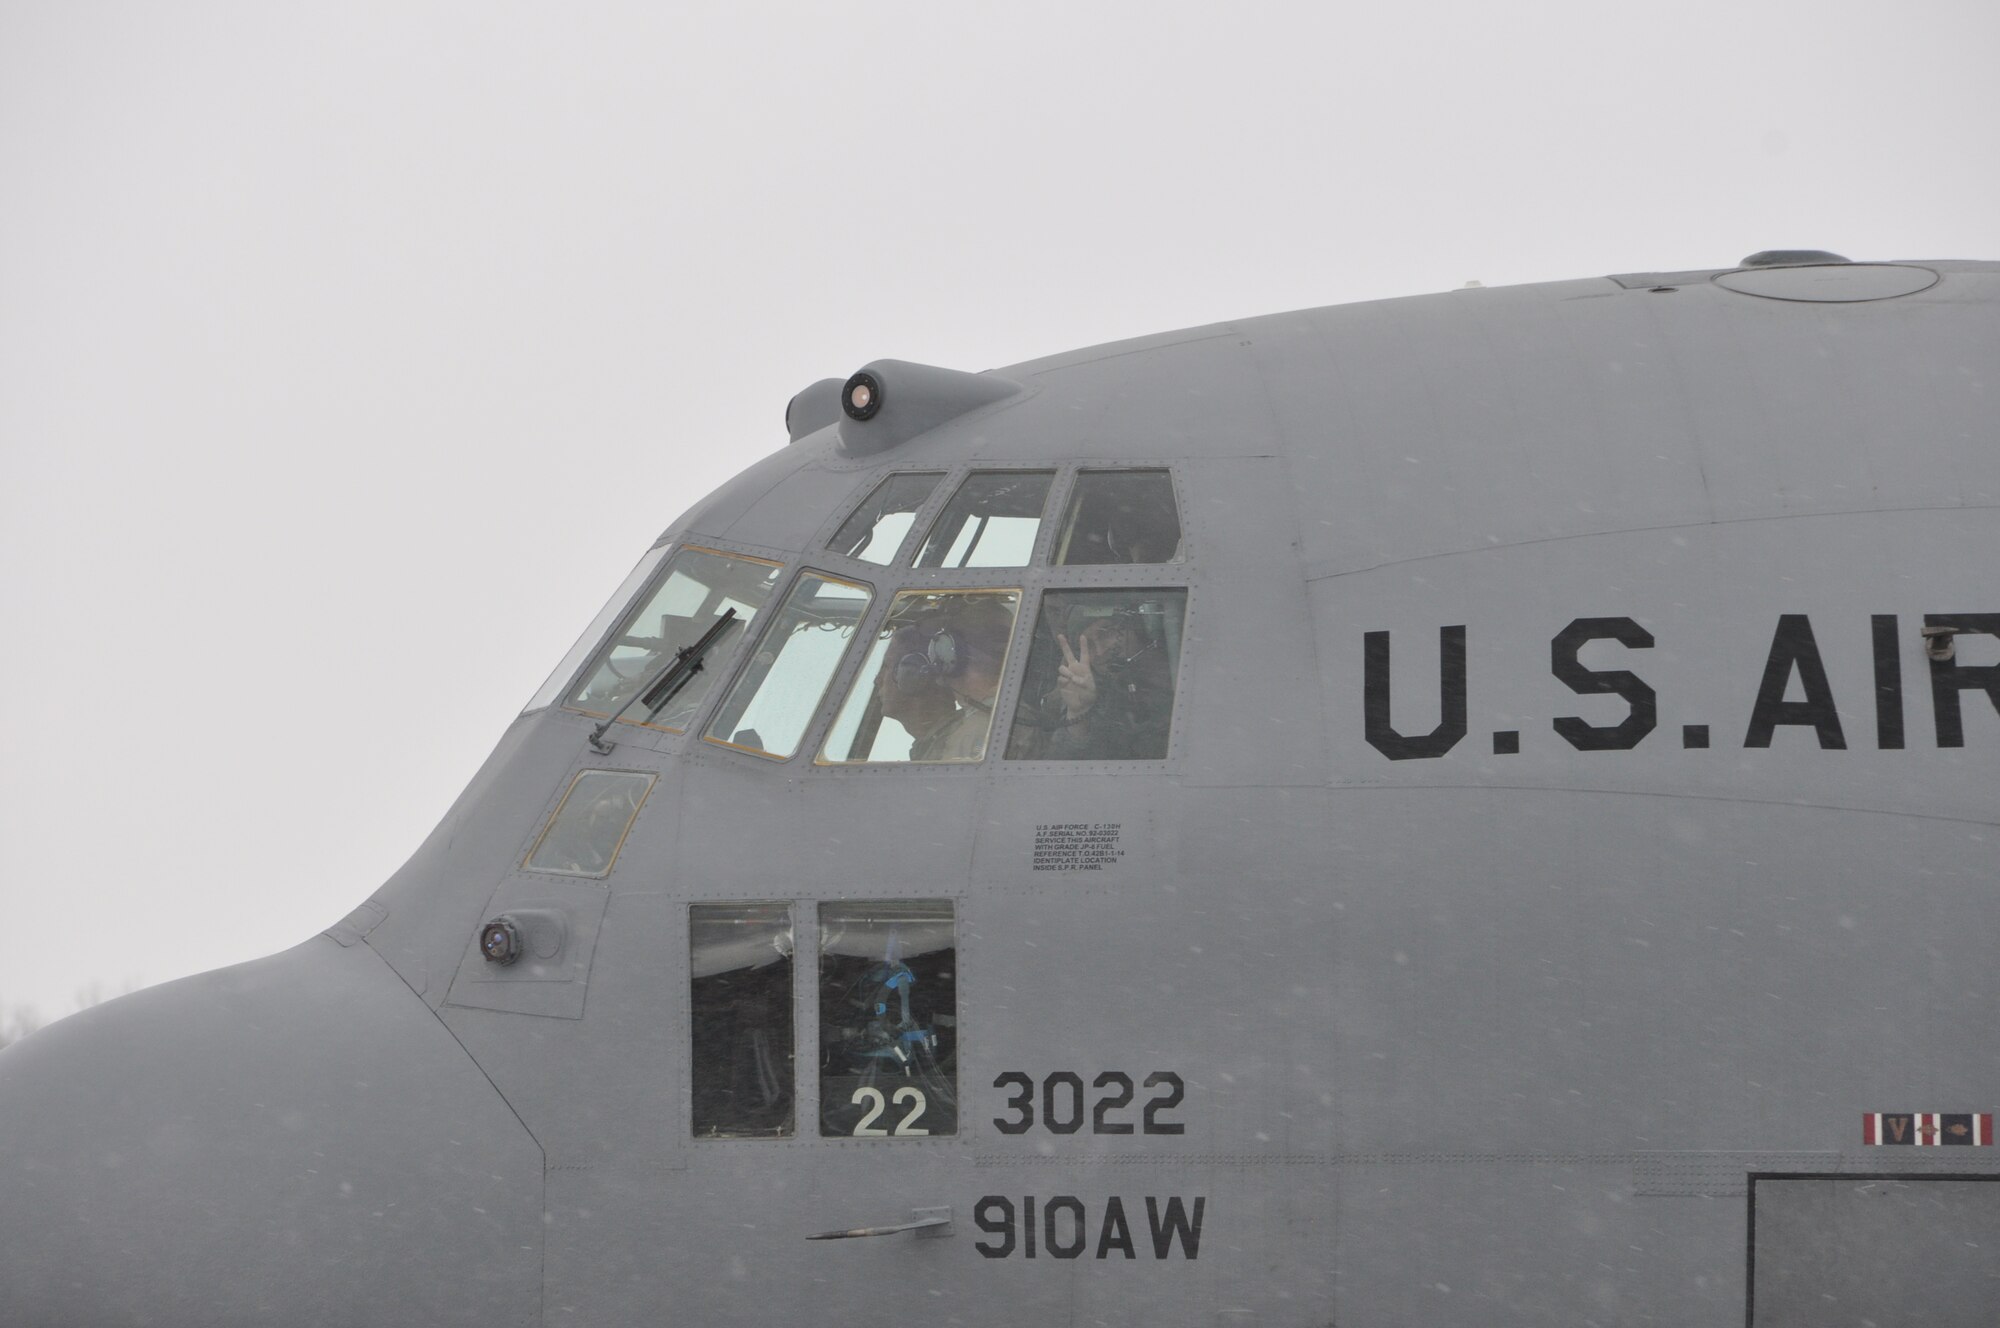 YOUNGSTOWN AIR RESERVE STATION, Ohio – Air Force Reservists assigned to the 910th Airlift Wing flash the victory symbol from the flight deck window of a C-130H Hercules cargo aircraft as it taxis on the flightline here, Jan. 19, 2012. The aircraft’s crew are among approximately 40 Citizen Airmen that are the last of more than 140 Air Force Reservists assigned to the 910th Airlift Wing’s flying and maintenance squadrons based at YARS, returning to Northeast Ohio after a 120-day deployment to Southwest Asia that supported airlift operations to various military installations throughout the U.S. Central Command (USCENTCOM) Area of Operations (AOR). U.S. Air Force photo by Master Sgt. Bob Barko Jr.